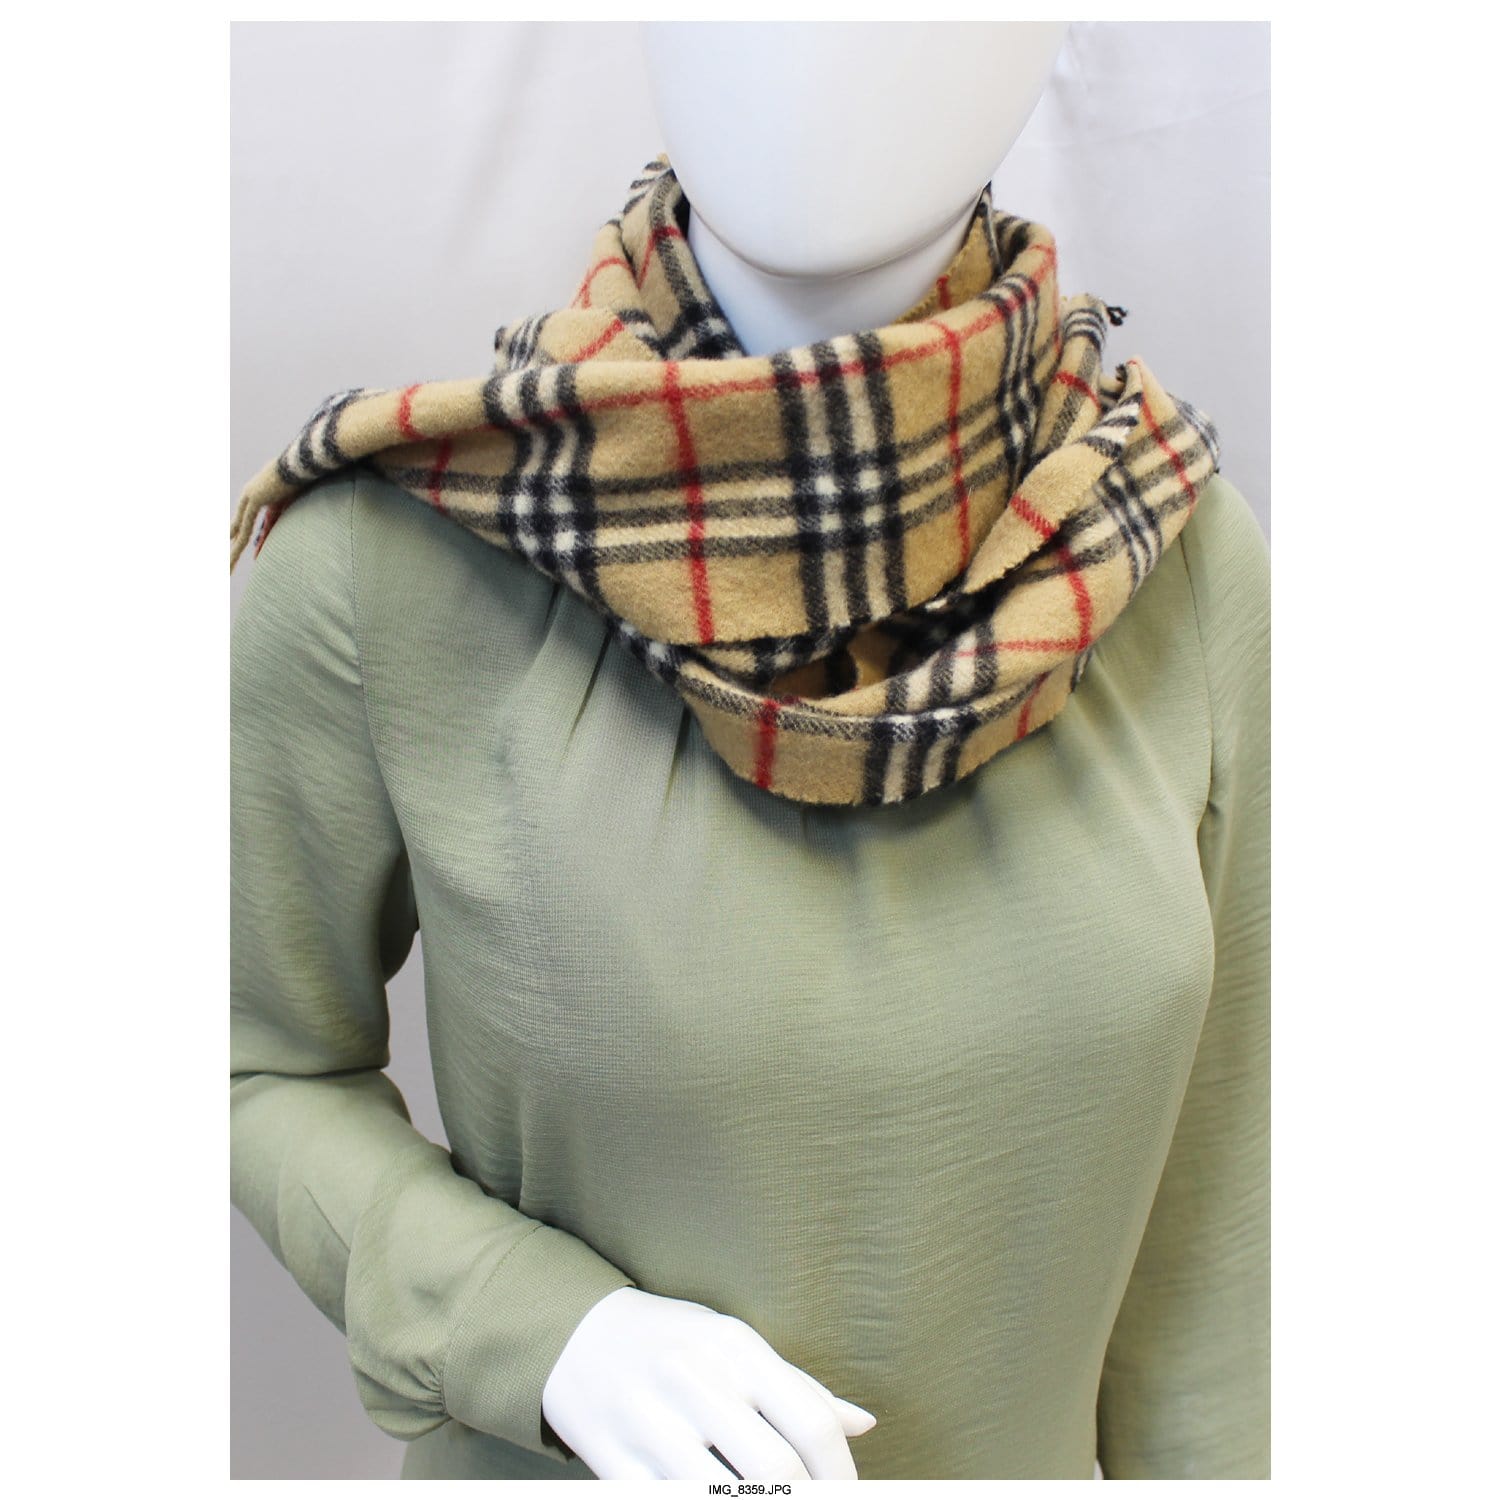 HOW TO SPOT A REAL BURBERRY SCARF